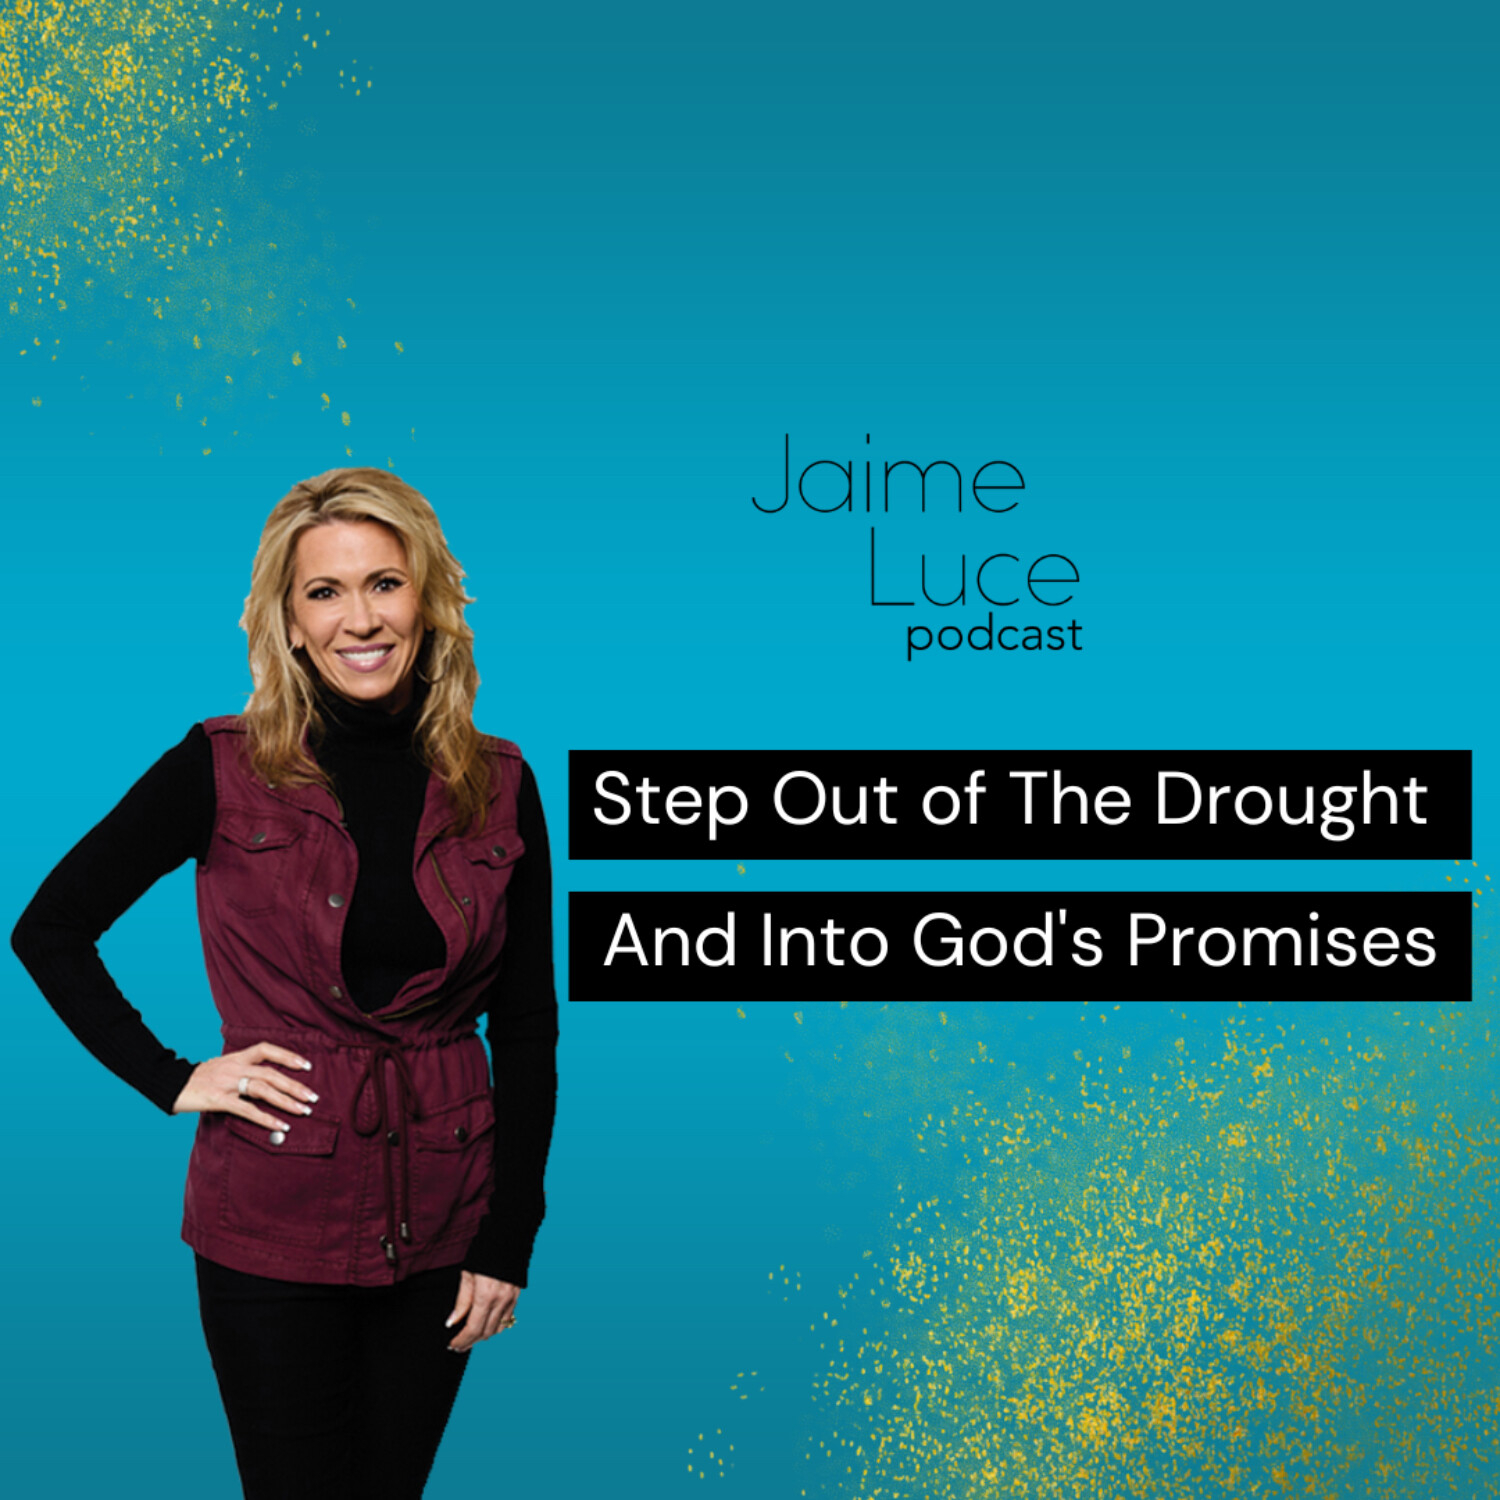 Step Out of The Drought And Into God's Promises